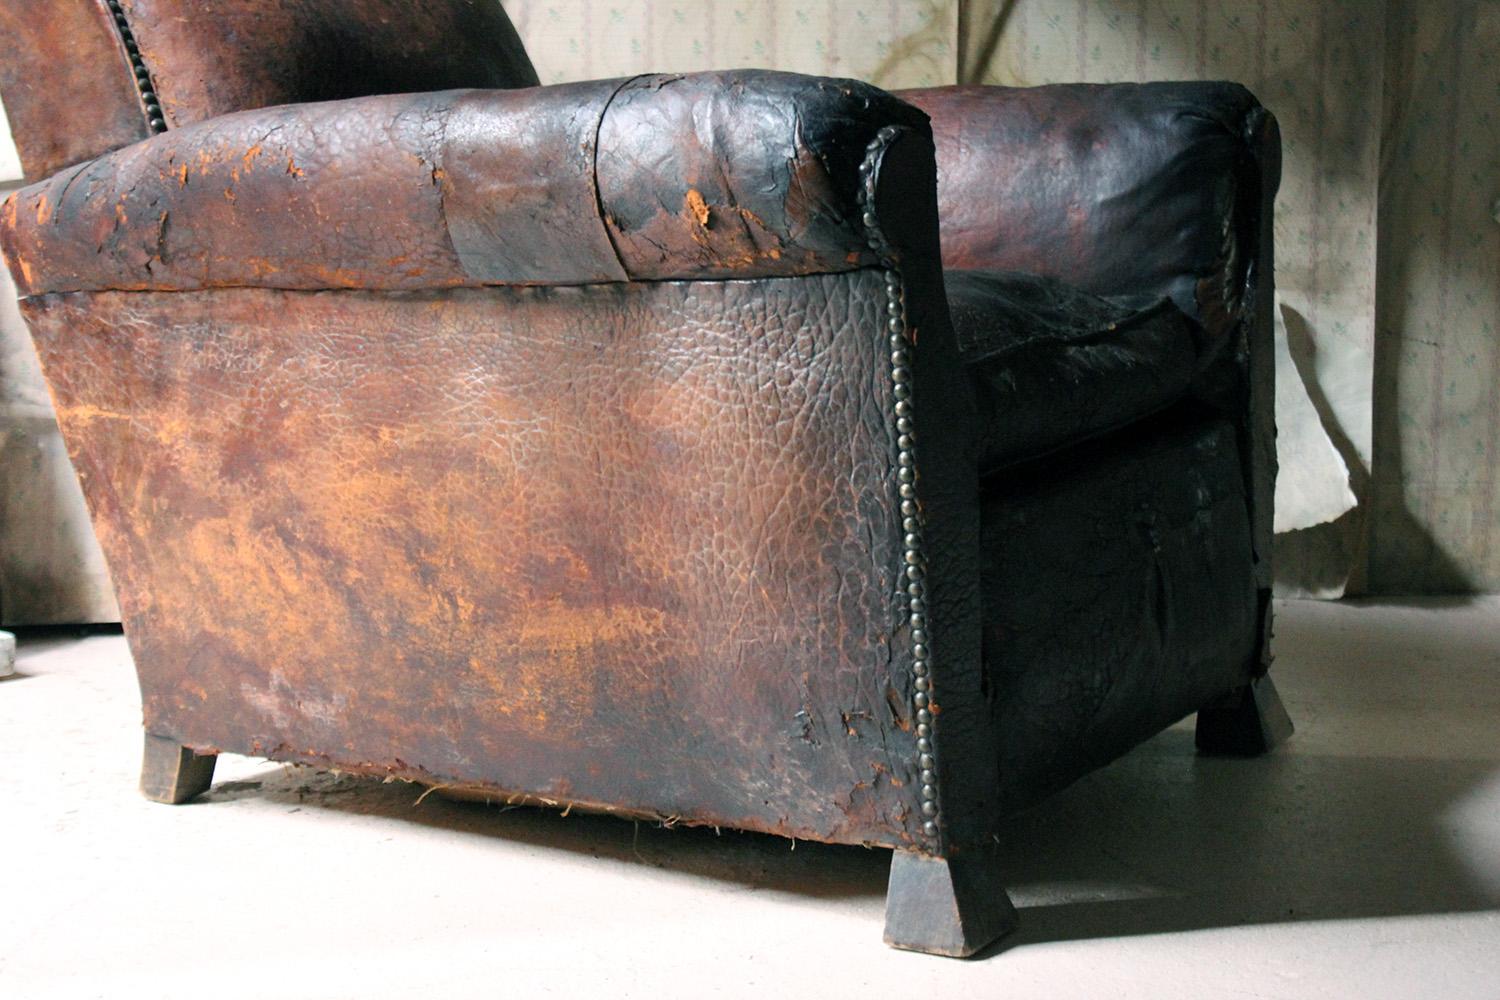 The comfortable and deep leather armchair having barrel type arms, the whole being hob-nail studded, and of typical club form, the feet being Art Deco inspired angular pyramid blocks, and the whole surviving from the early 20th century.
 
The